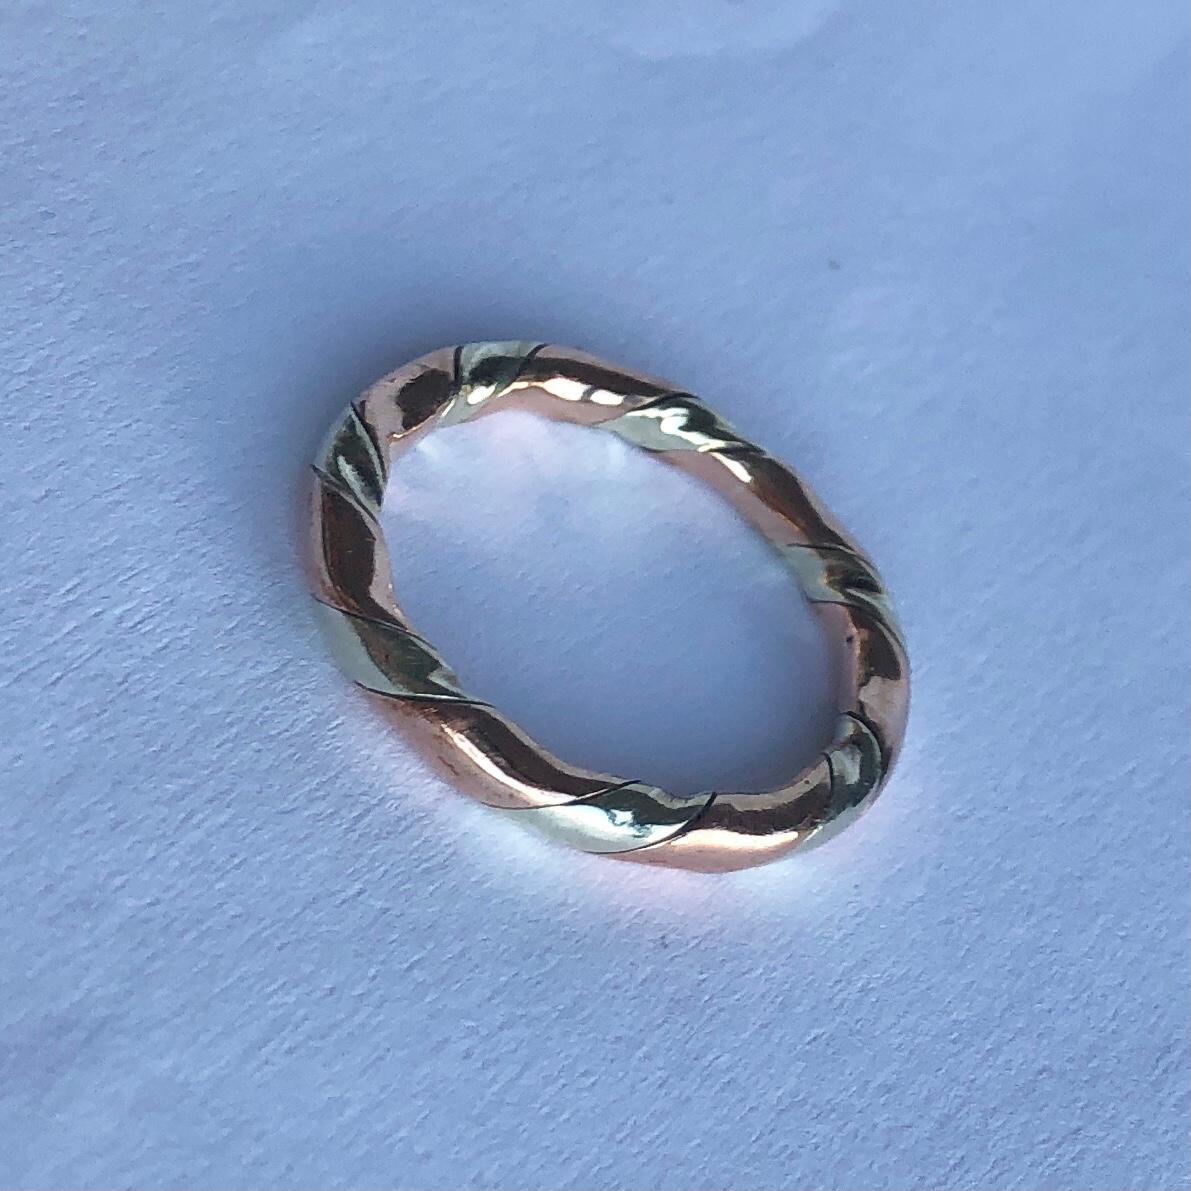 This tri-colour ring is modelled out of 18 Carat rose gold and white gold. They perfectly wrap around each other and make a bright glossy band. 

Ring Size: K or 5 1/4 
Band Width: 2.5mm

Weight: 2.9g 